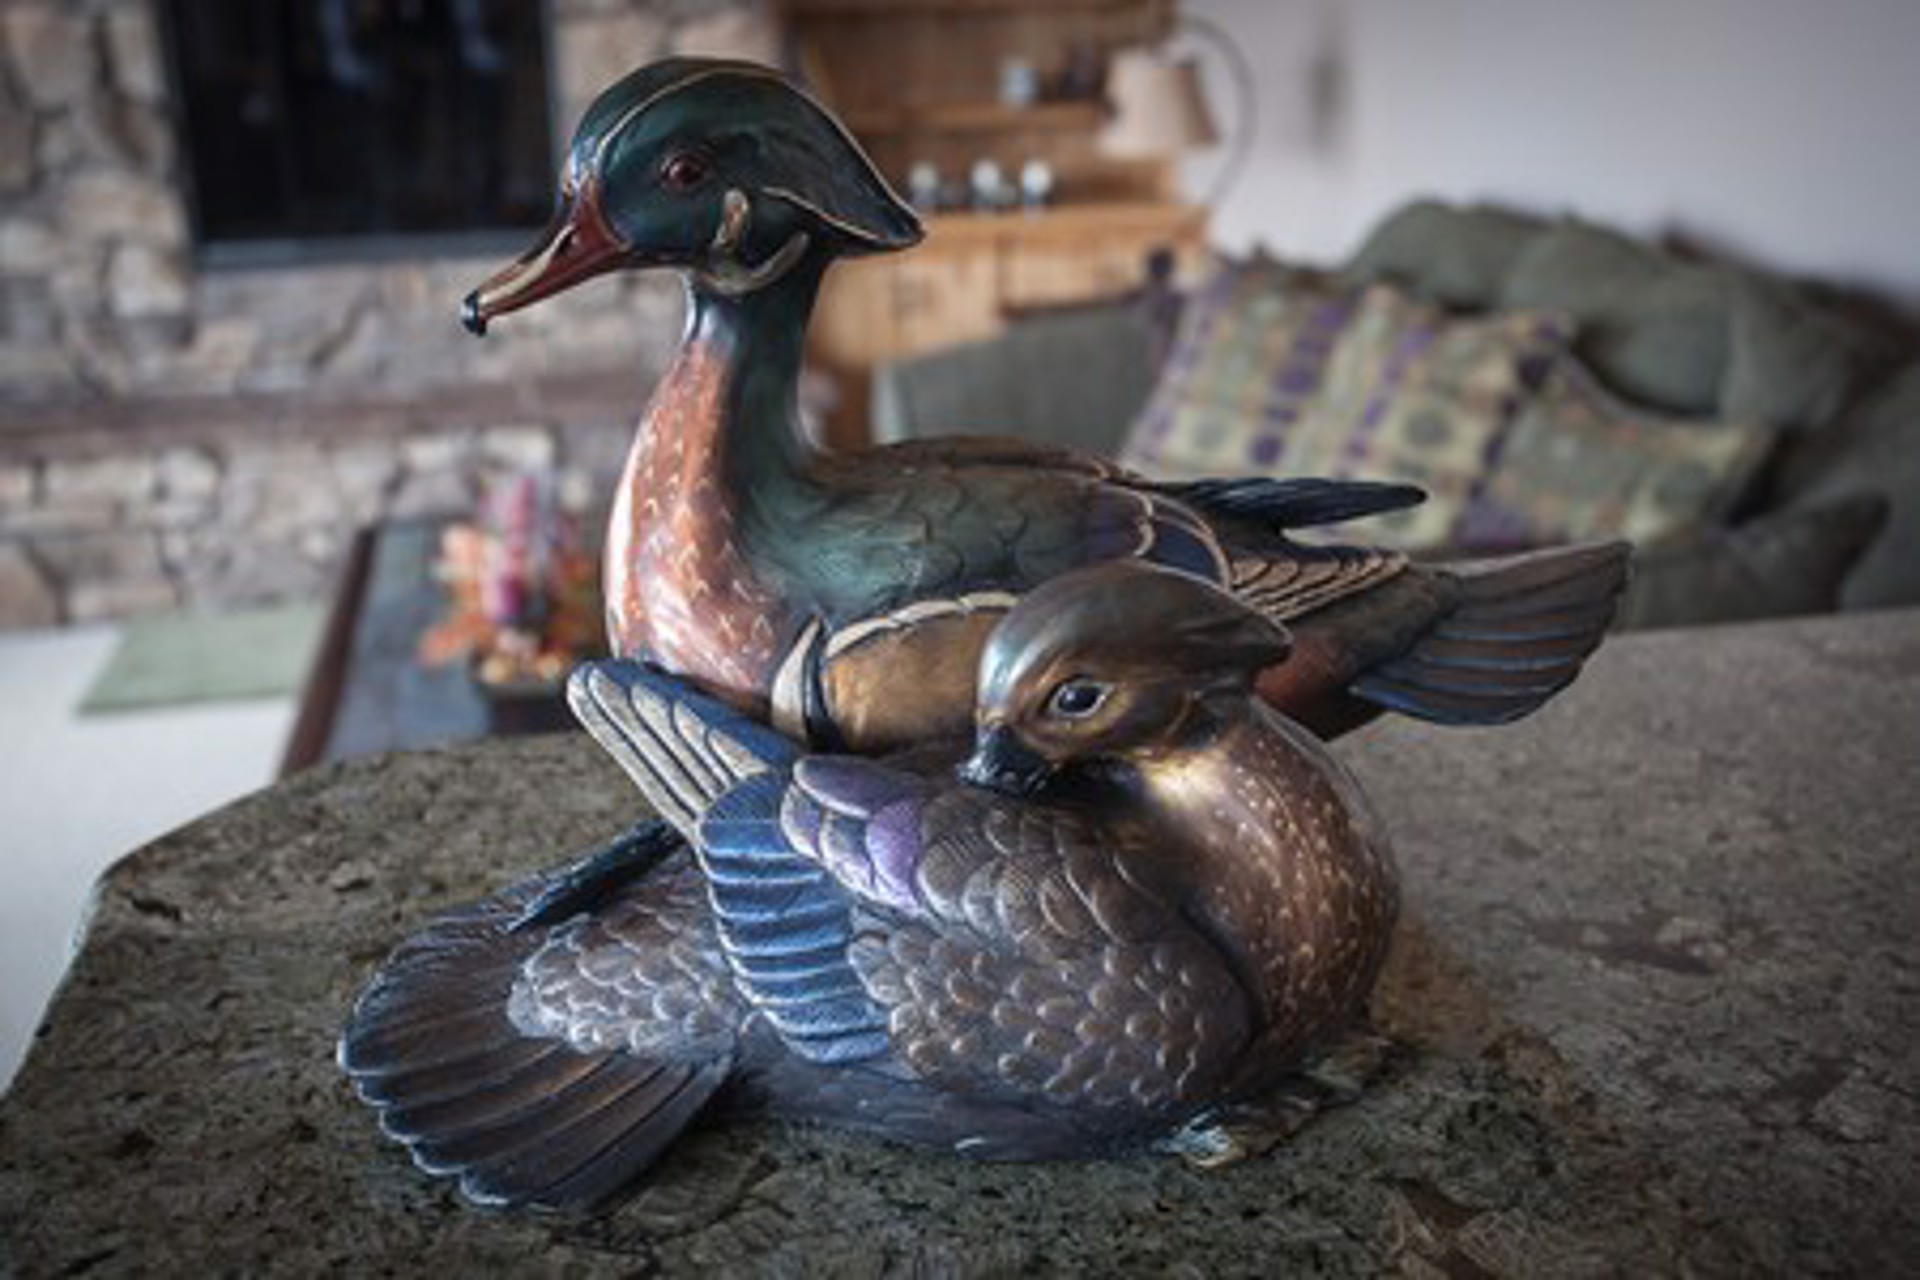 Wood Duck Original Bronze Sculpture by Rip and Alison Caswell, Contemporary Fine Art, Modern Wildlife Art, Available At Gallery Wild